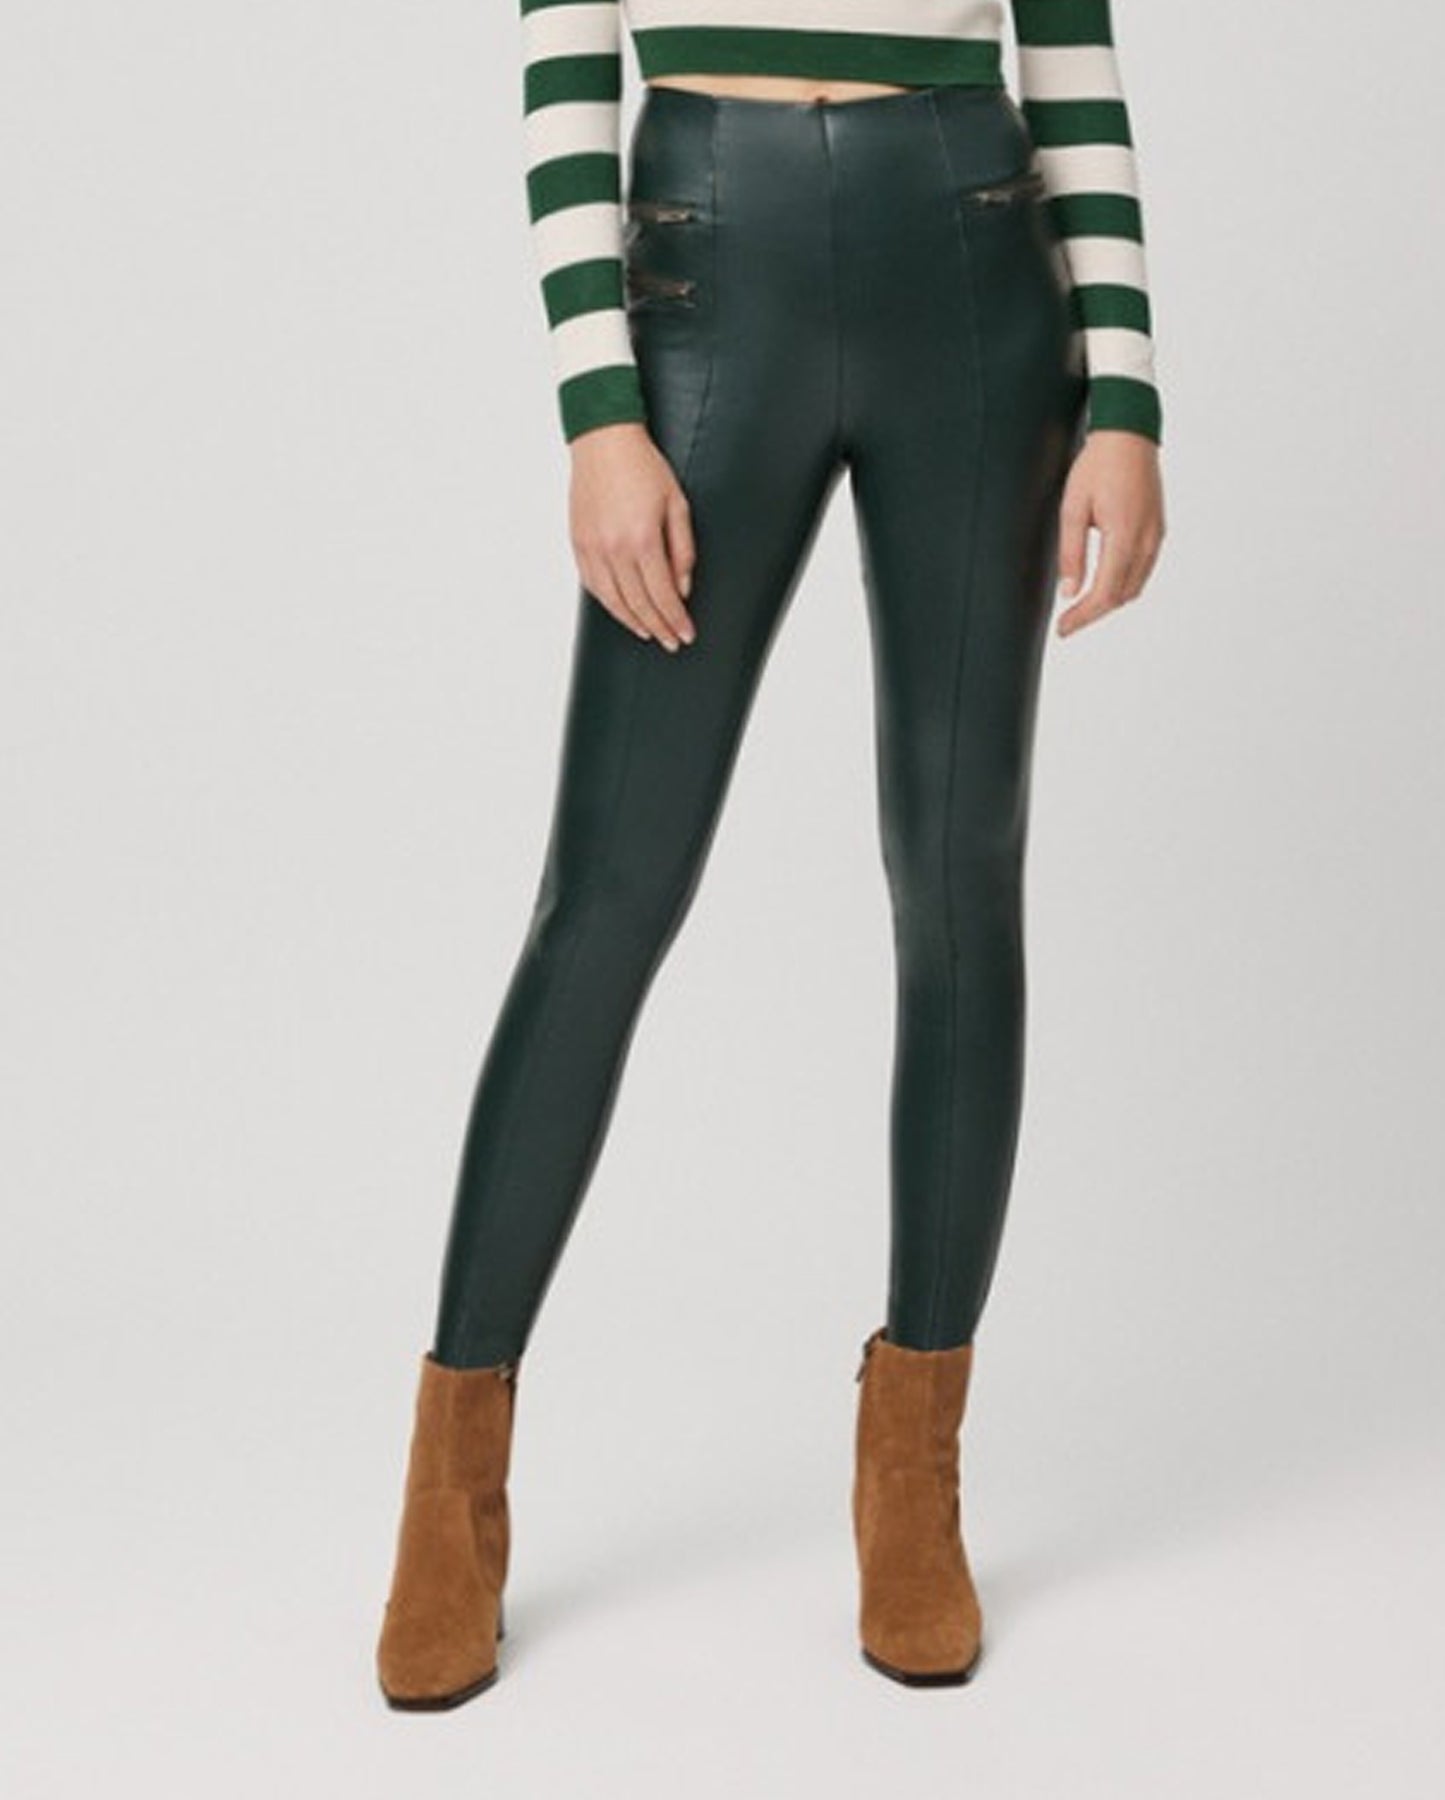 Ysabel Mora 70163 Faux Leather Leggings - Bottle green high rise leather look fleece lined thermal leggings with centre seam down the front of the legs, 2 zips on one side and 1 on the other and darts at the back to ensure a snug fit.